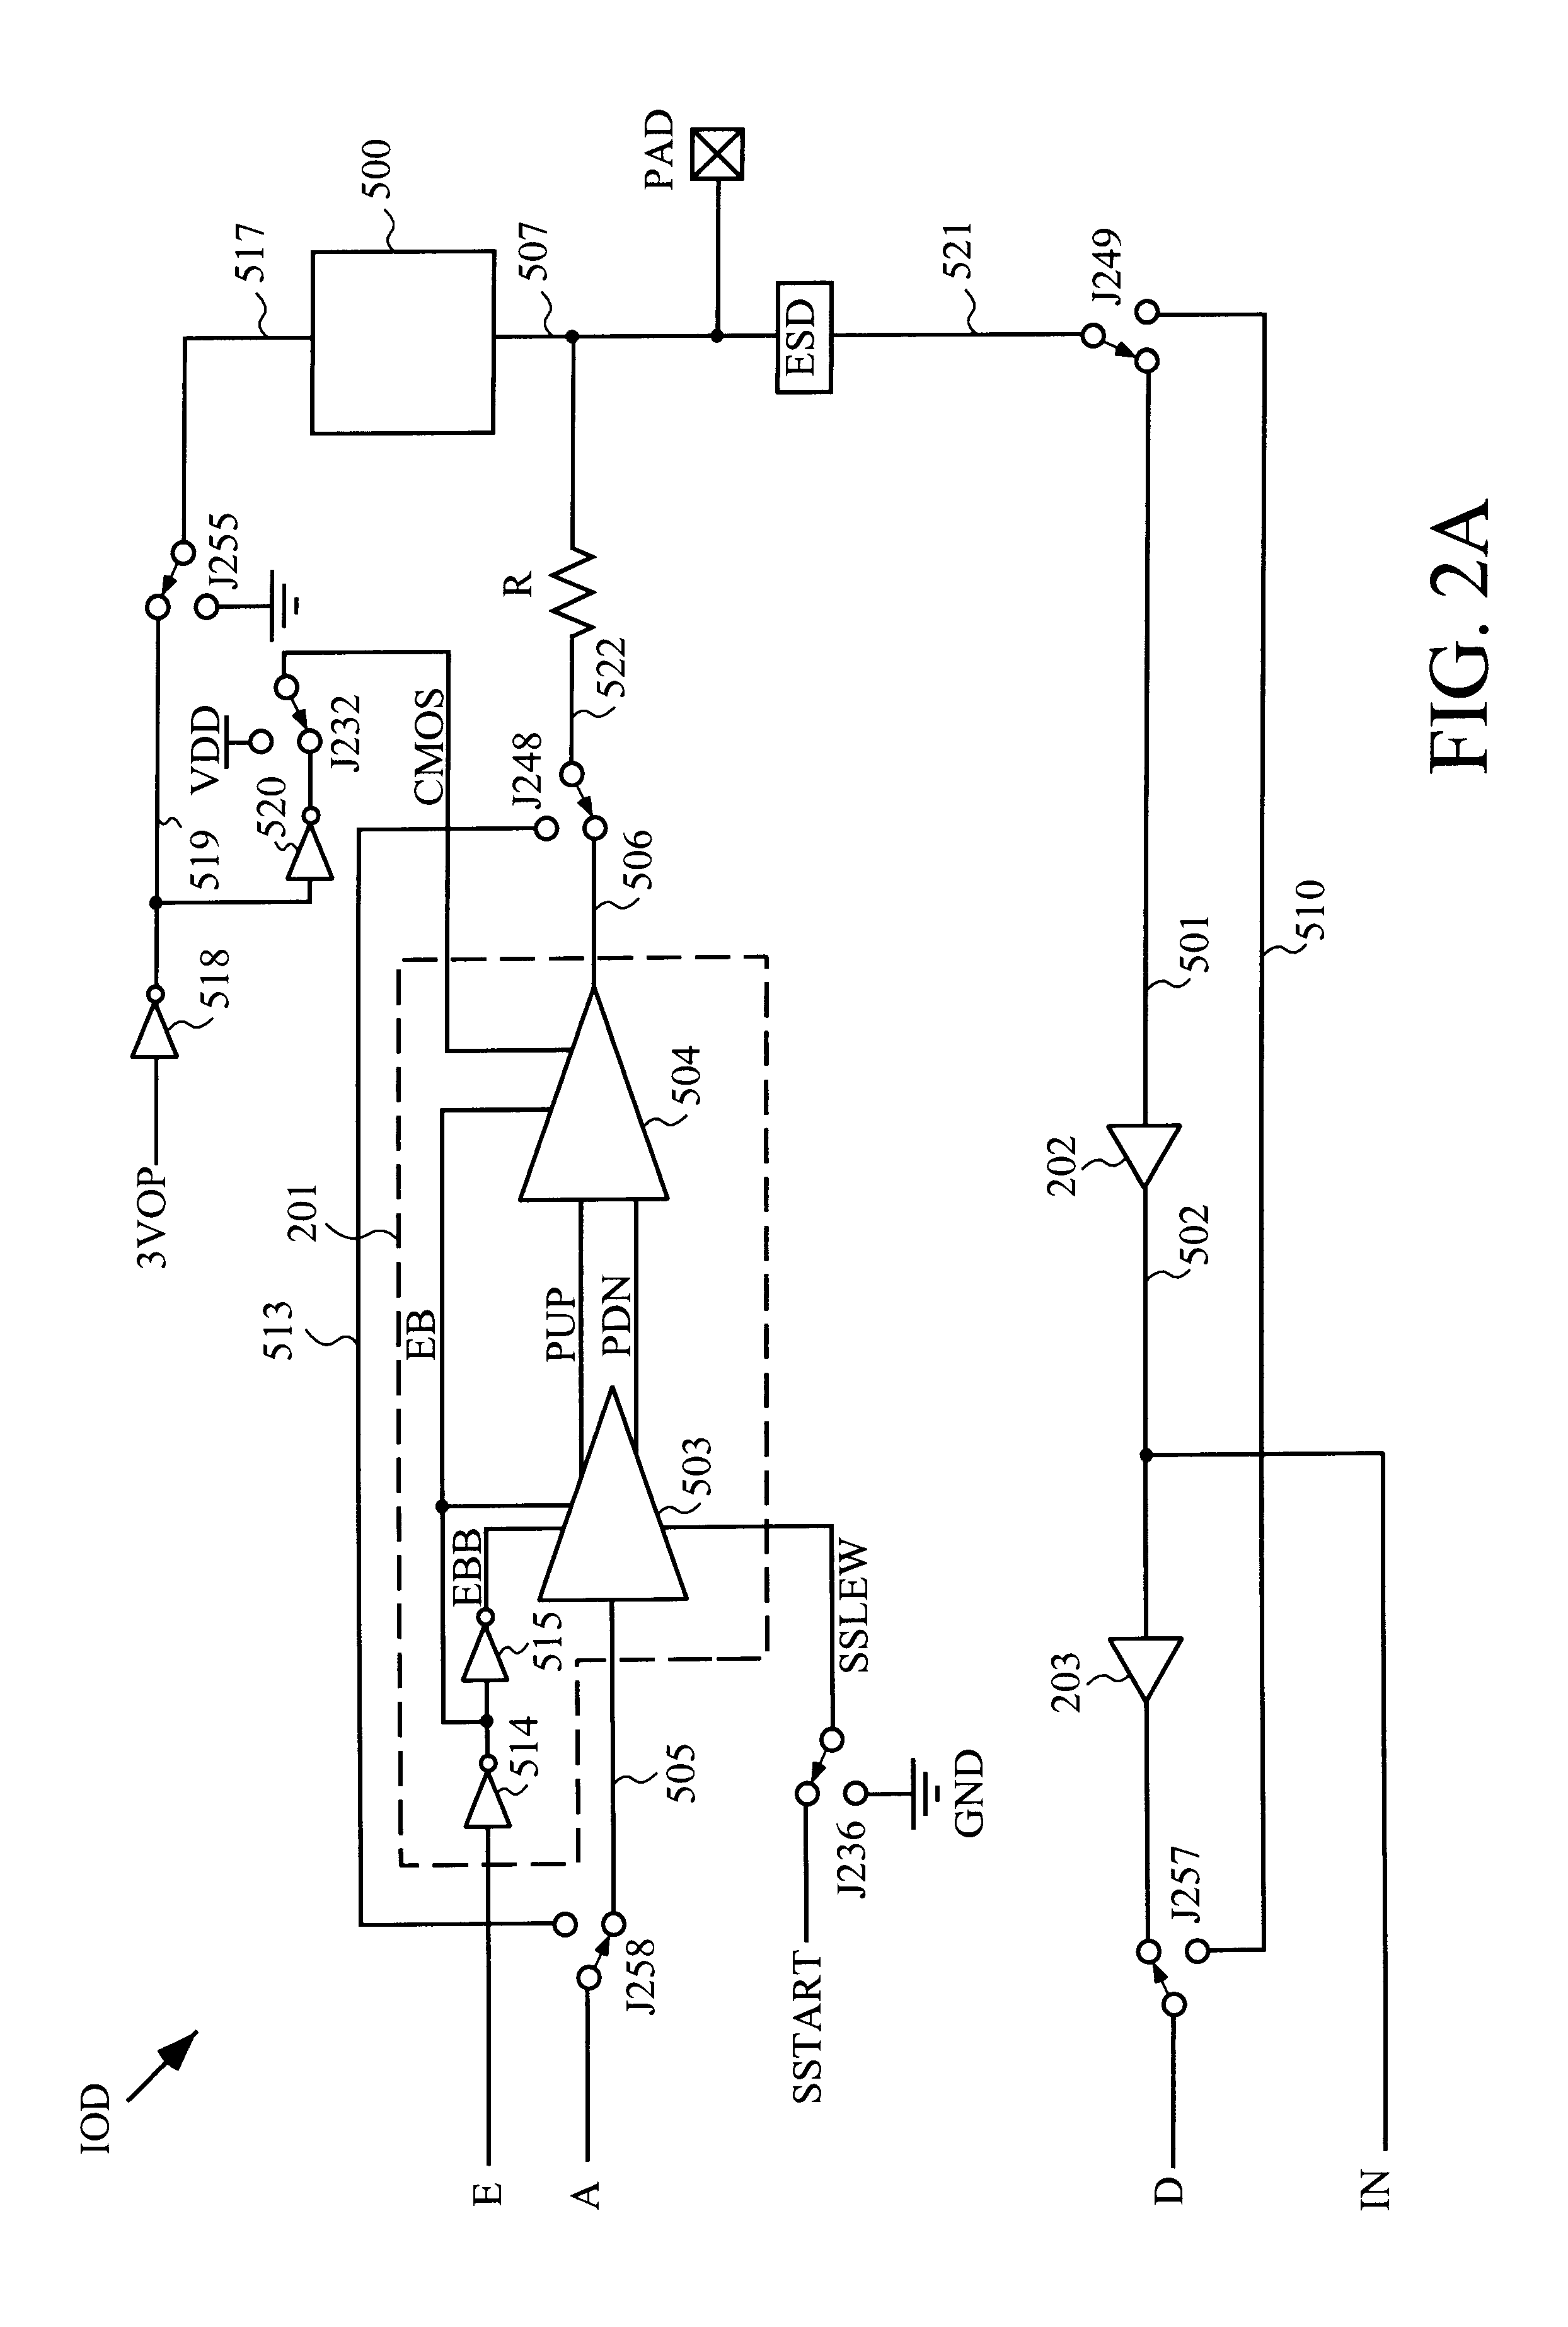 Programmable IC with gate array core and boundary scan capability